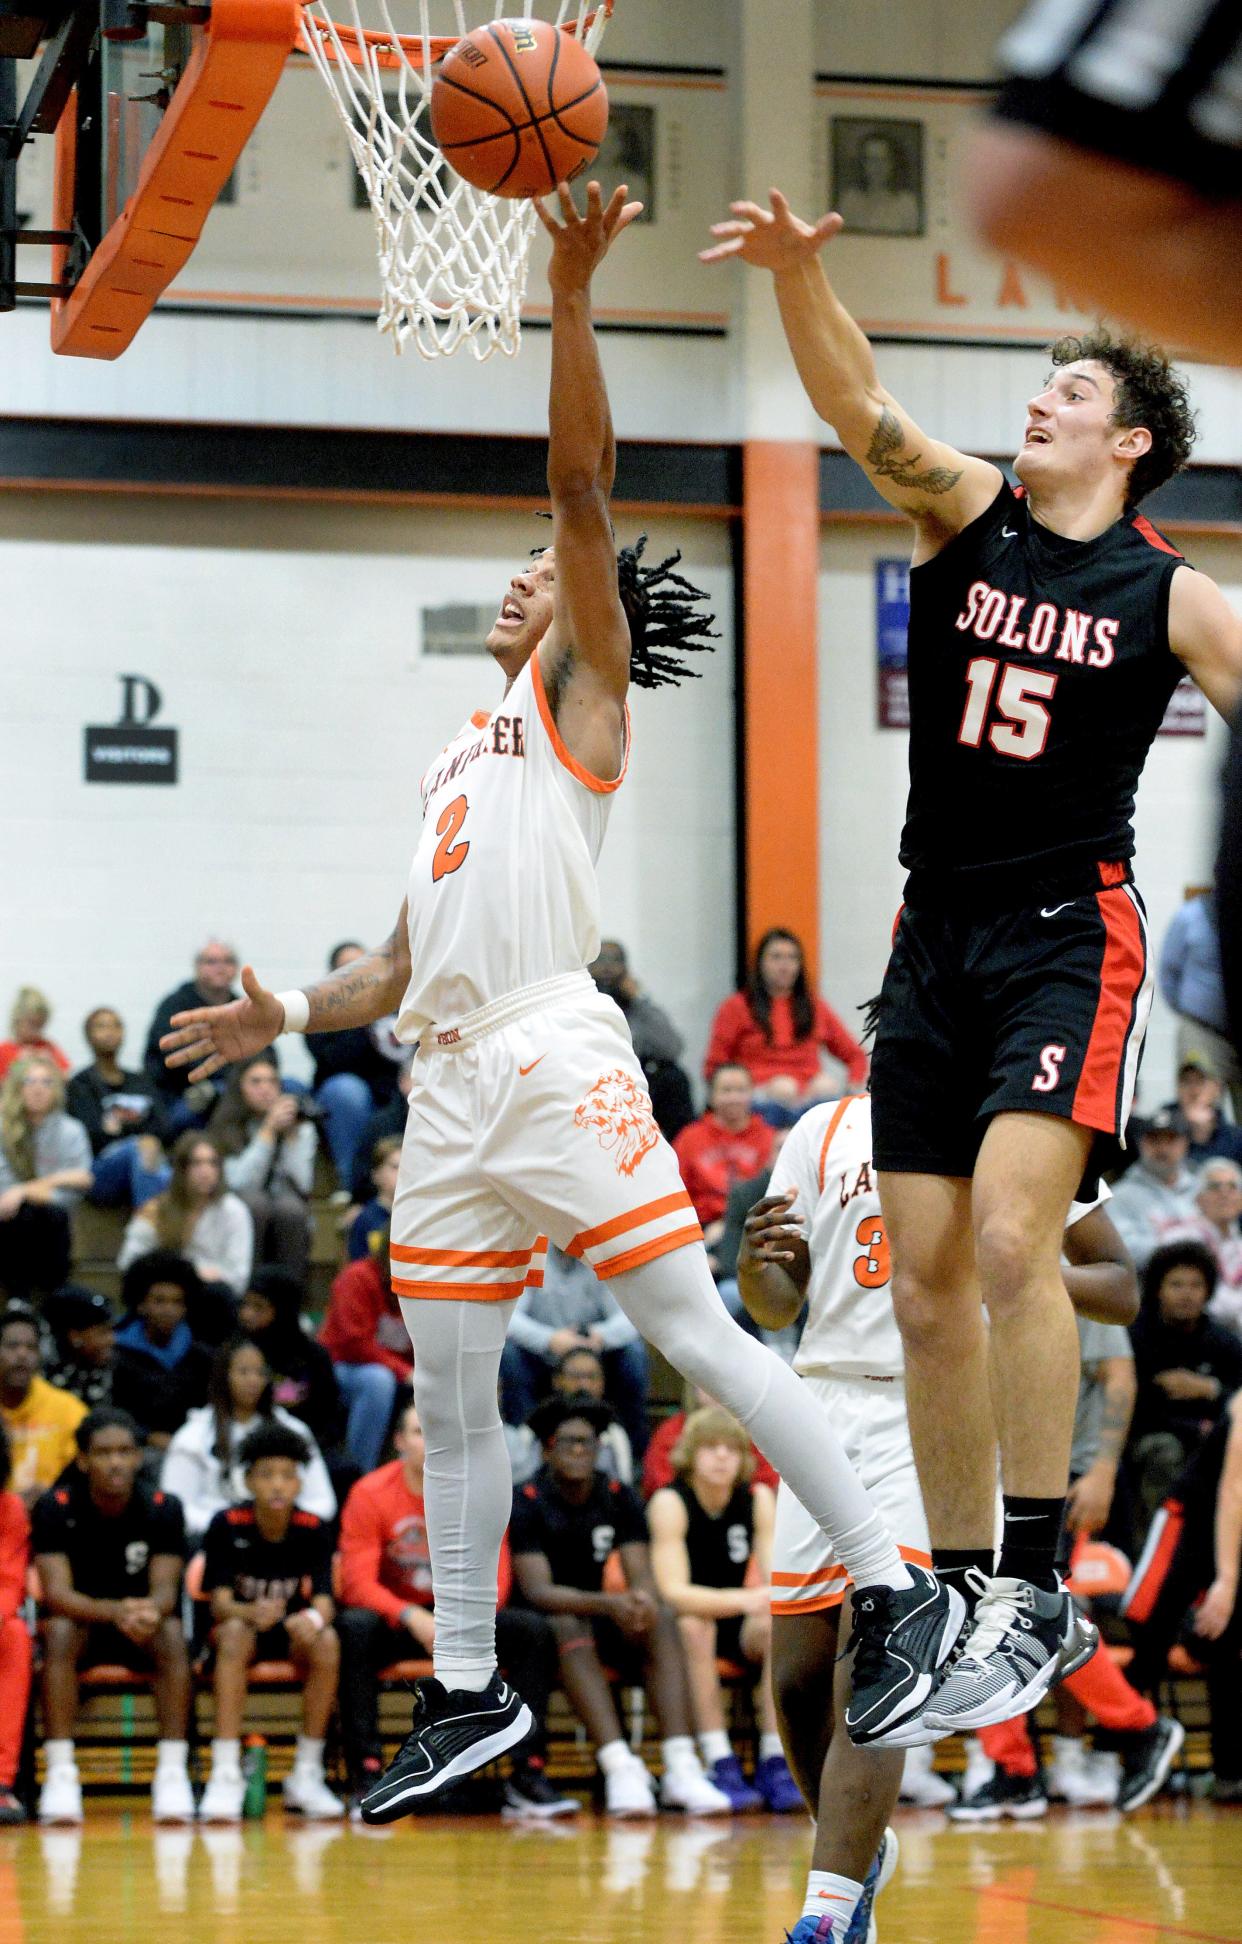 Lanphier's Jessie Bates III goes up for a shot while being guarded by Springfield High's Paul Hartman during a game earlier this season.